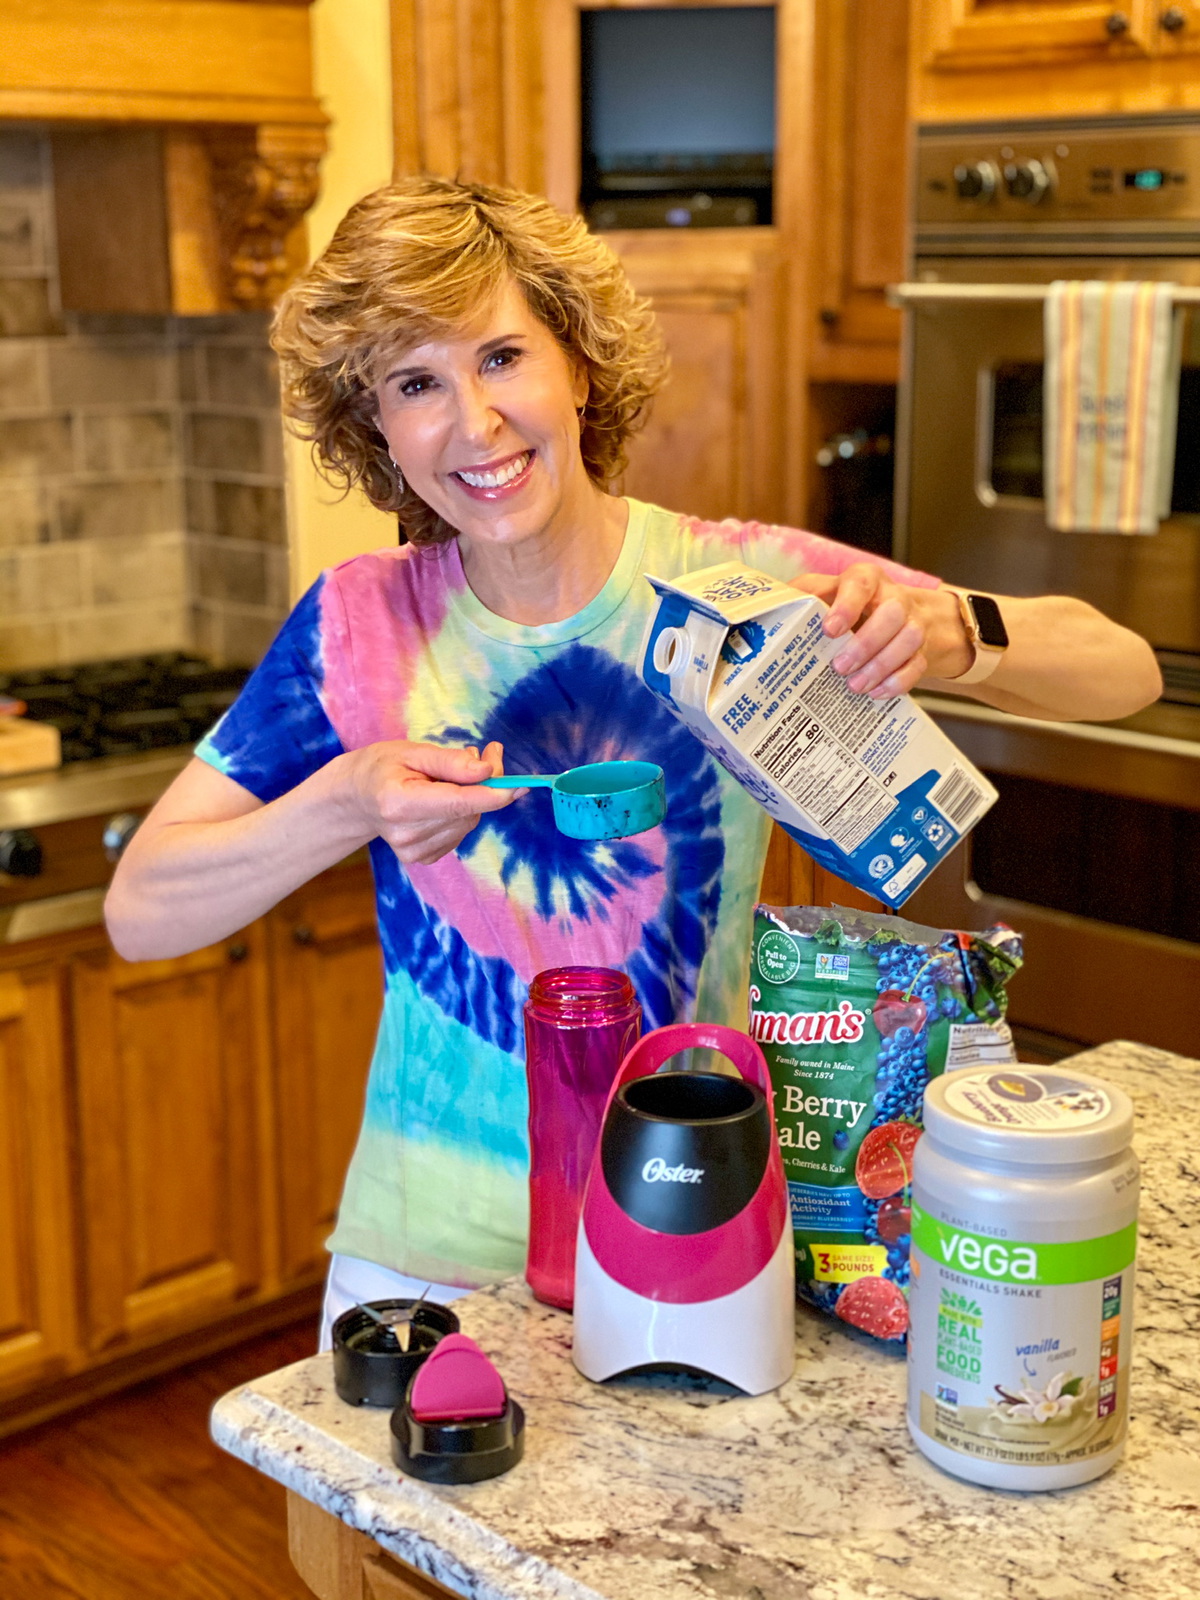 woman in tie dye shirt making a smoothie in kitchen